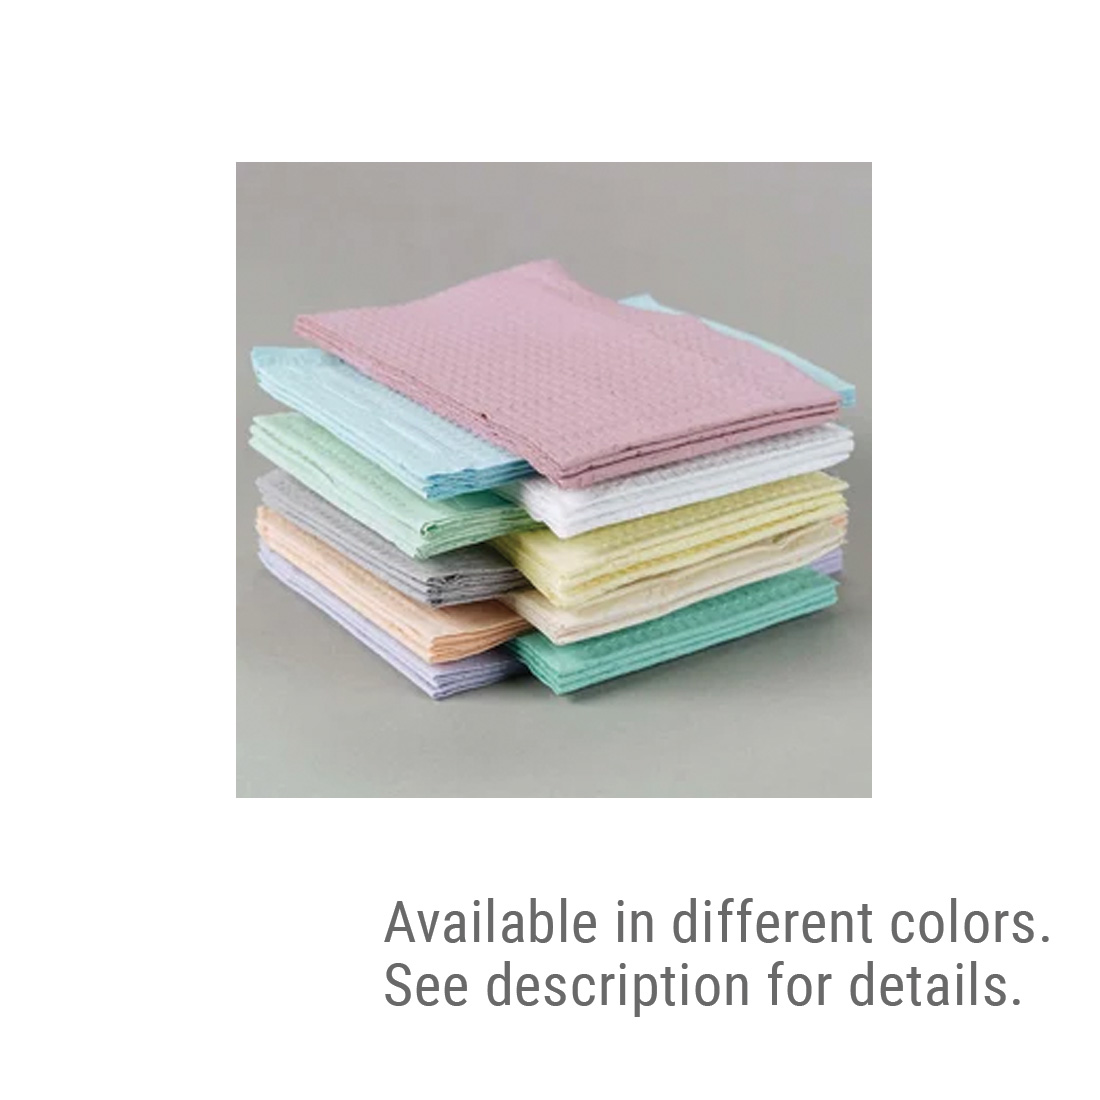 Patient Towel Tissue/Poly 13" x 18" 3-Ply Teal - 500/Case